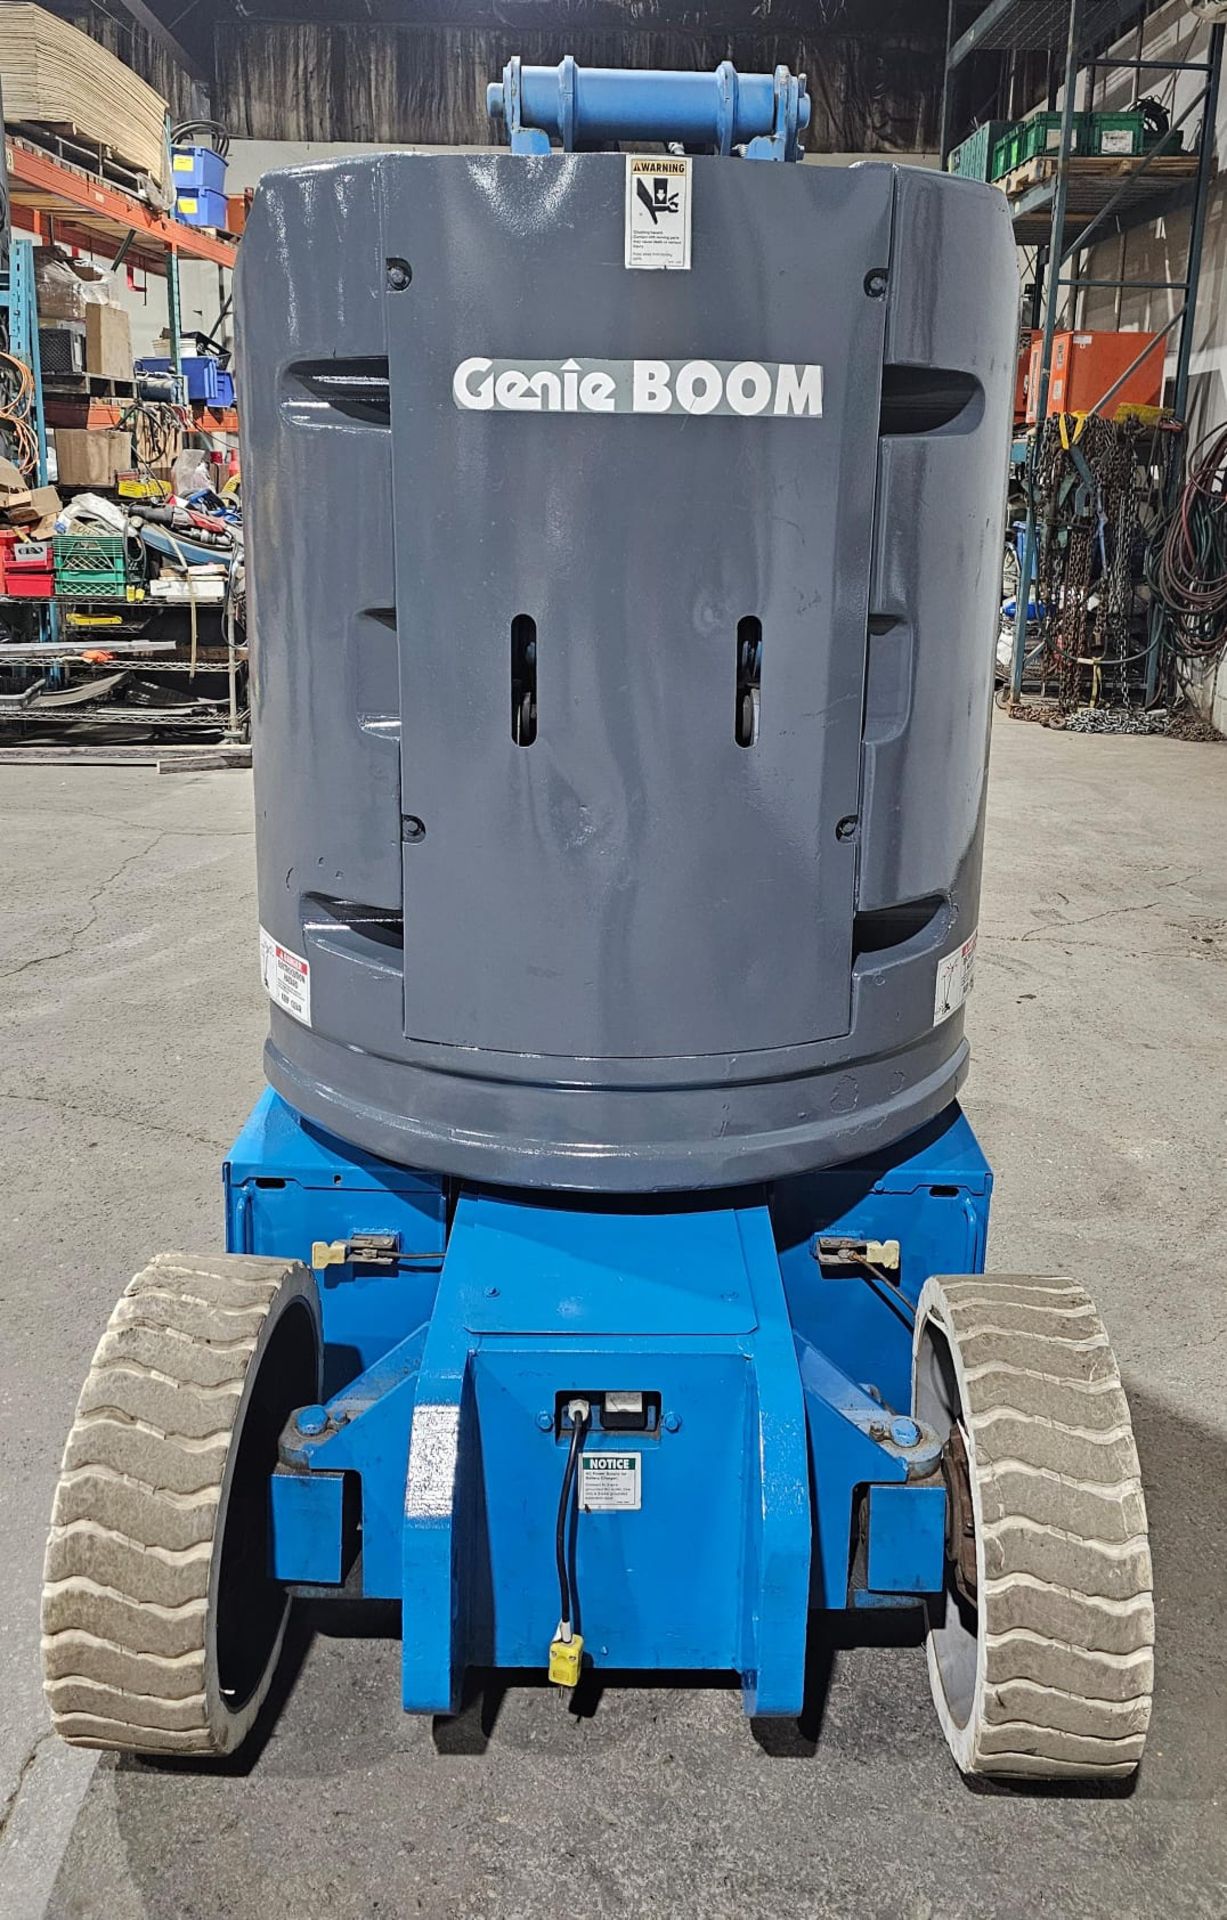 Genie model Z-30/20N Zoom Boom Electric Motorized Man Lift 30' Height & 21' Reach - with 24V Battery - Image 3 of 10